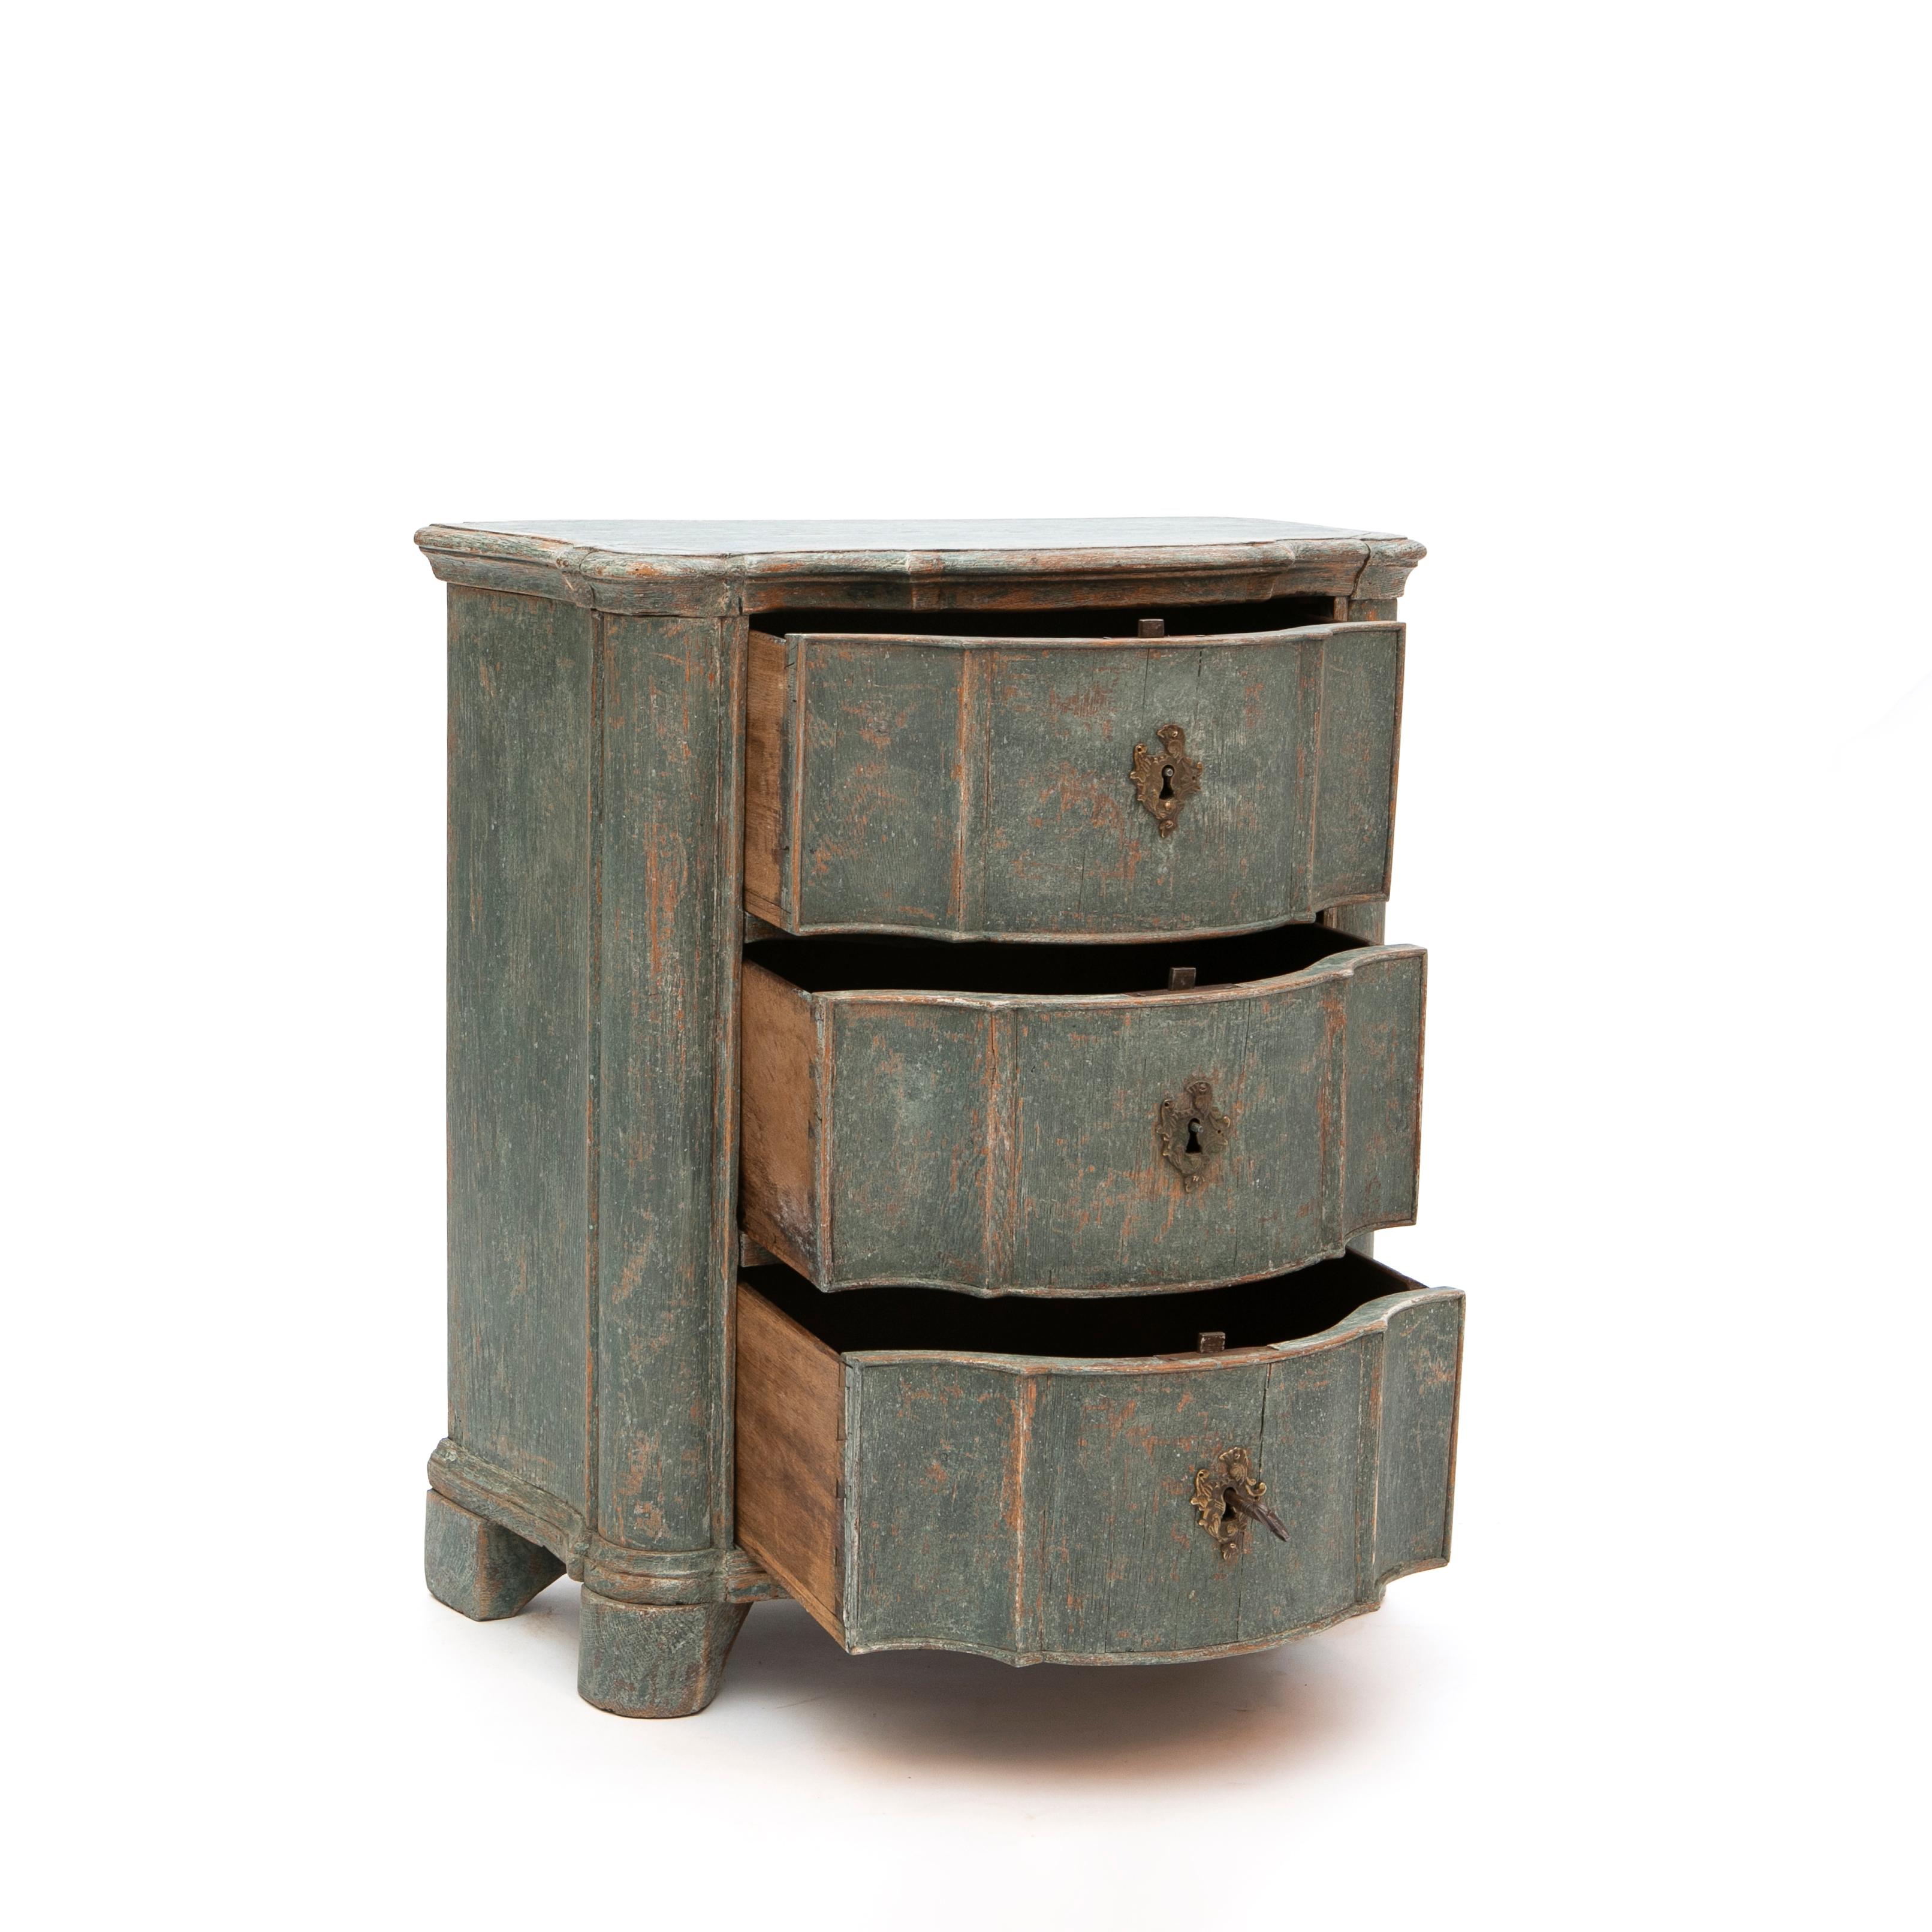 Danish baroque period chest of drawers with clean, curved lines.
Scalloped top above 3 serpentine drawers.
Later professional painted blue with wonderful and distressed, authentic finish.
The paint has been gently scraped, to reveal layers of its